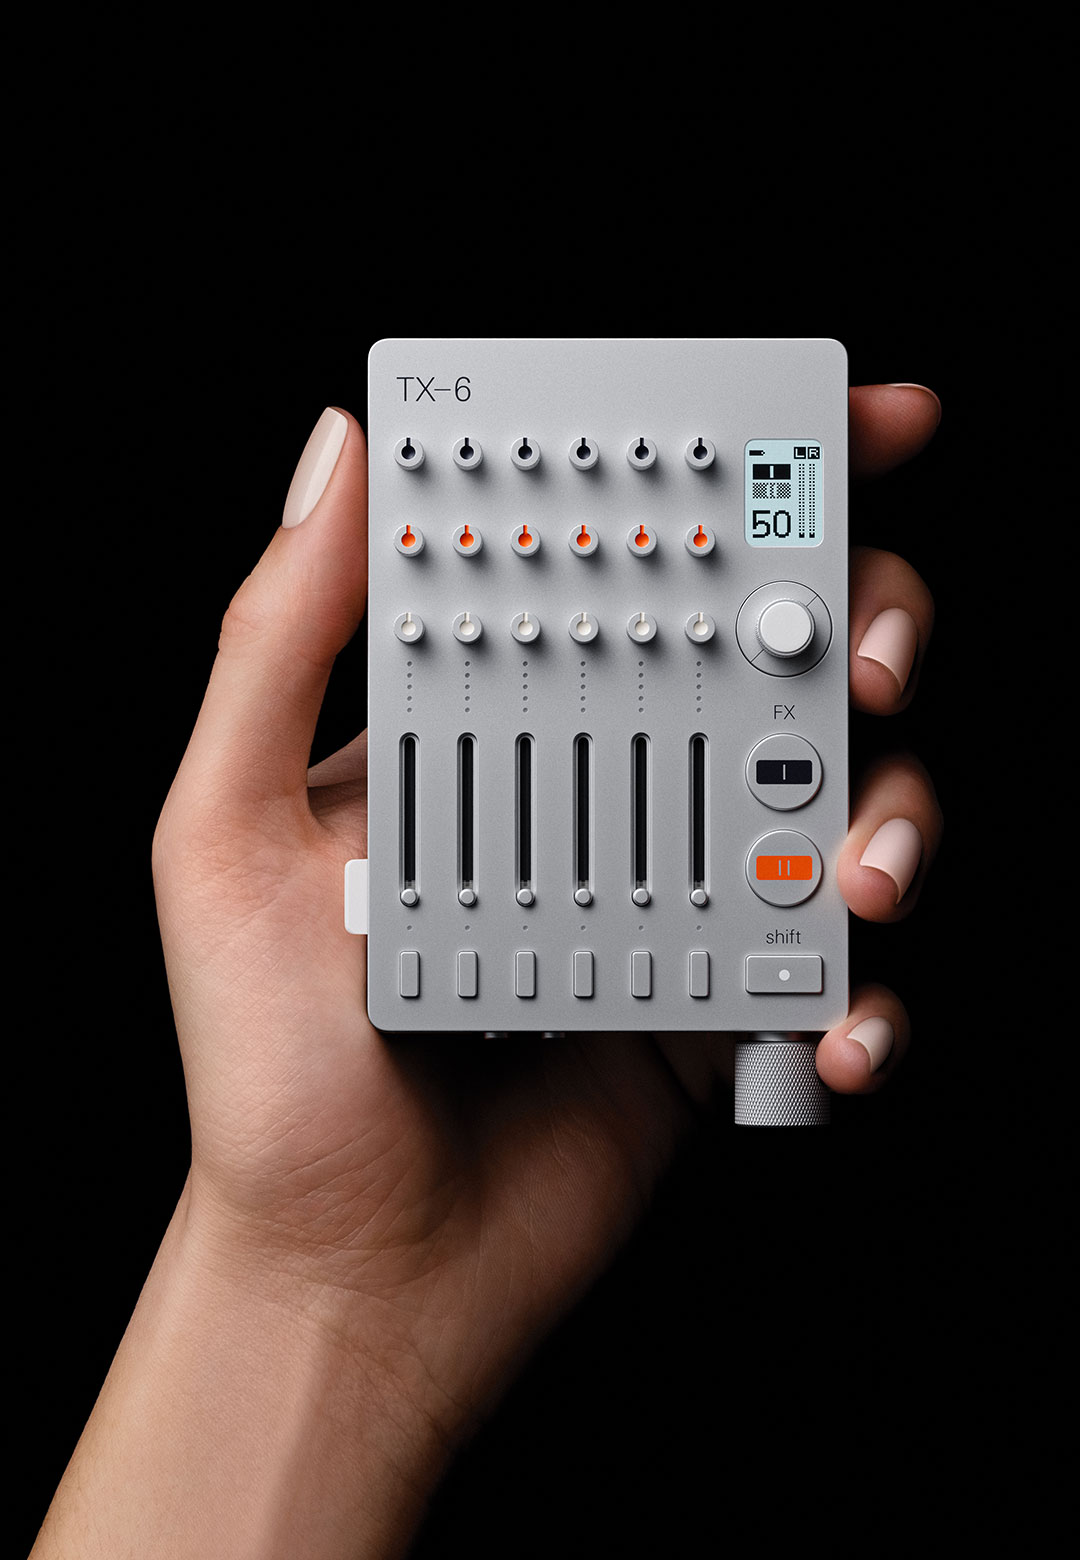 Teenage Engineering's ultra-portable mixer TX-6 is the smallest of its kind